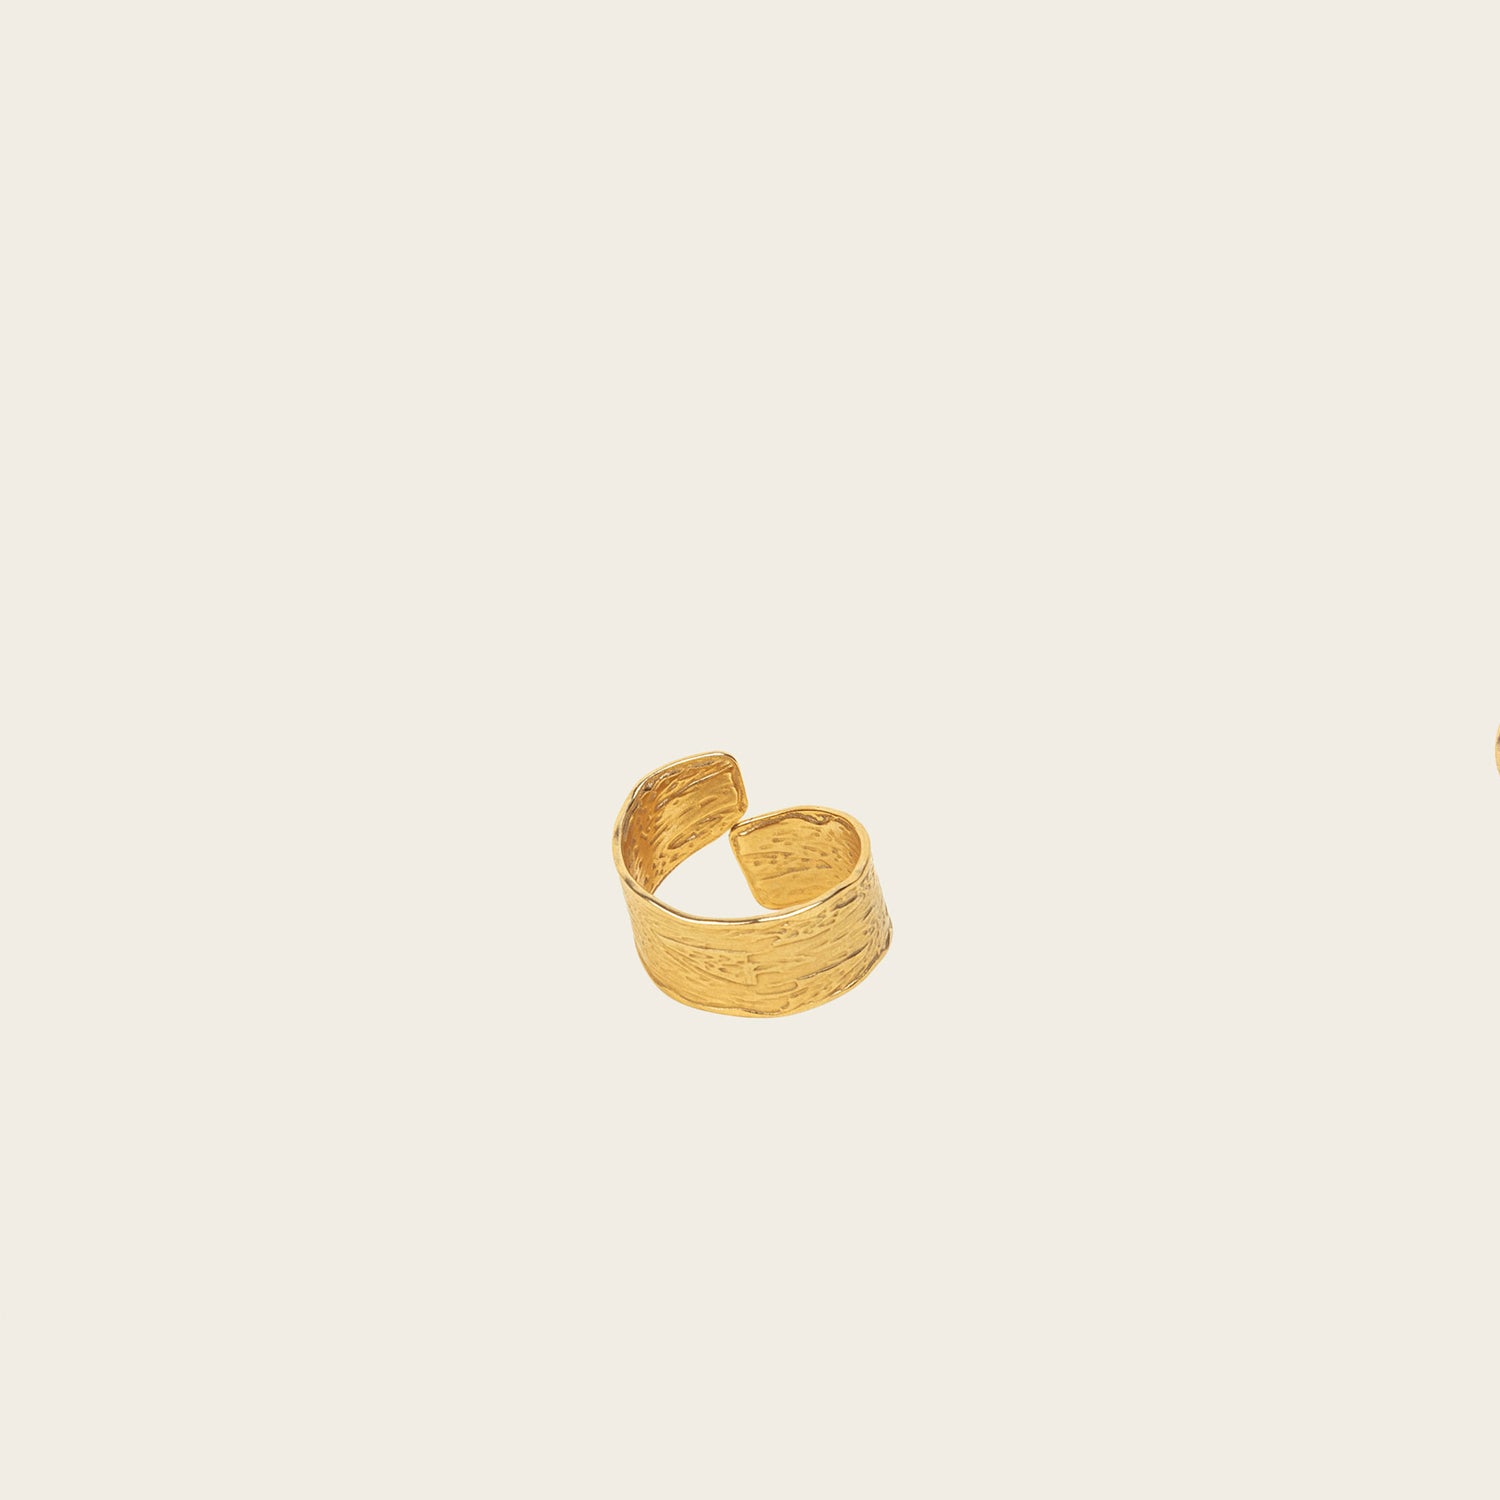 Image of the Textured Curl Ring in Gold is adjustable between sizes 7-10, crafted using 14K Gold Plated Stainless Steel for durability and resistance to tarnish, water, and lead, nickel, and cadmium. Please note that only one ring is included.